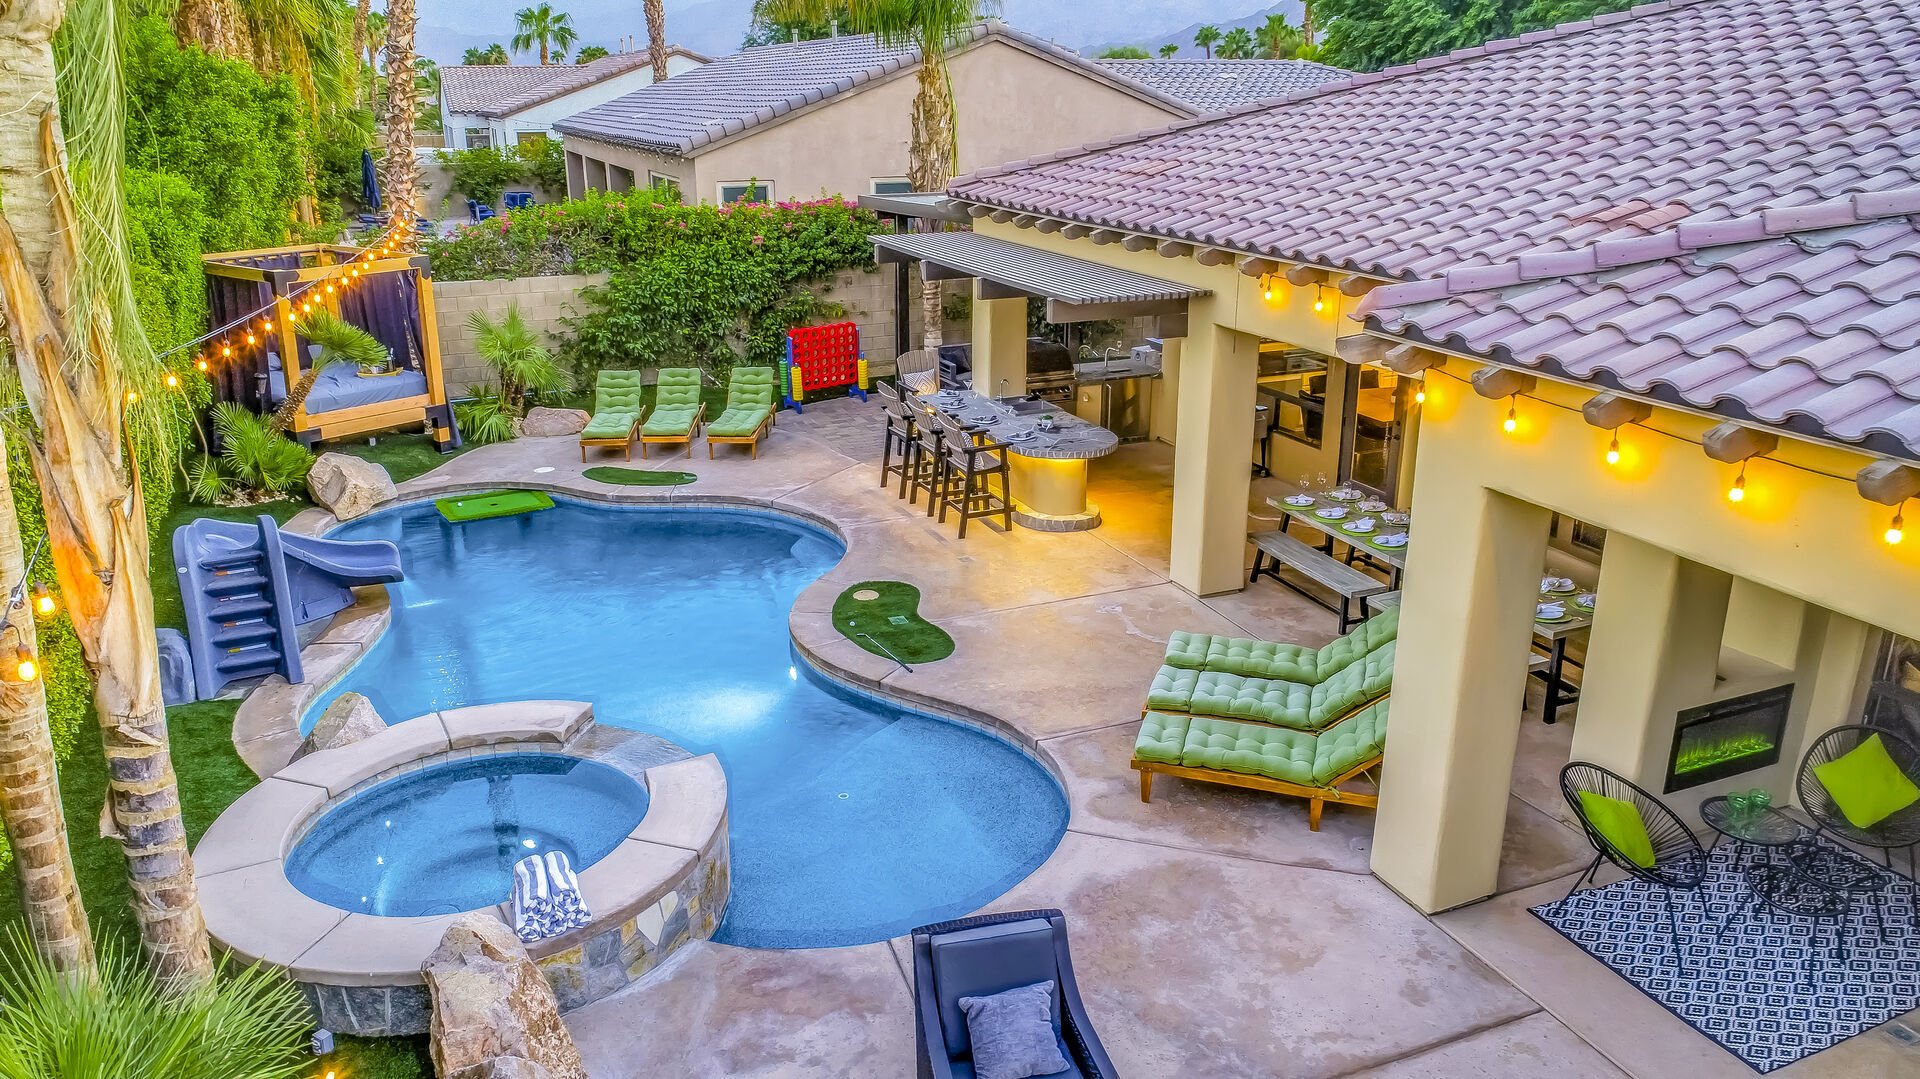 This backyard is perfect for YOU!